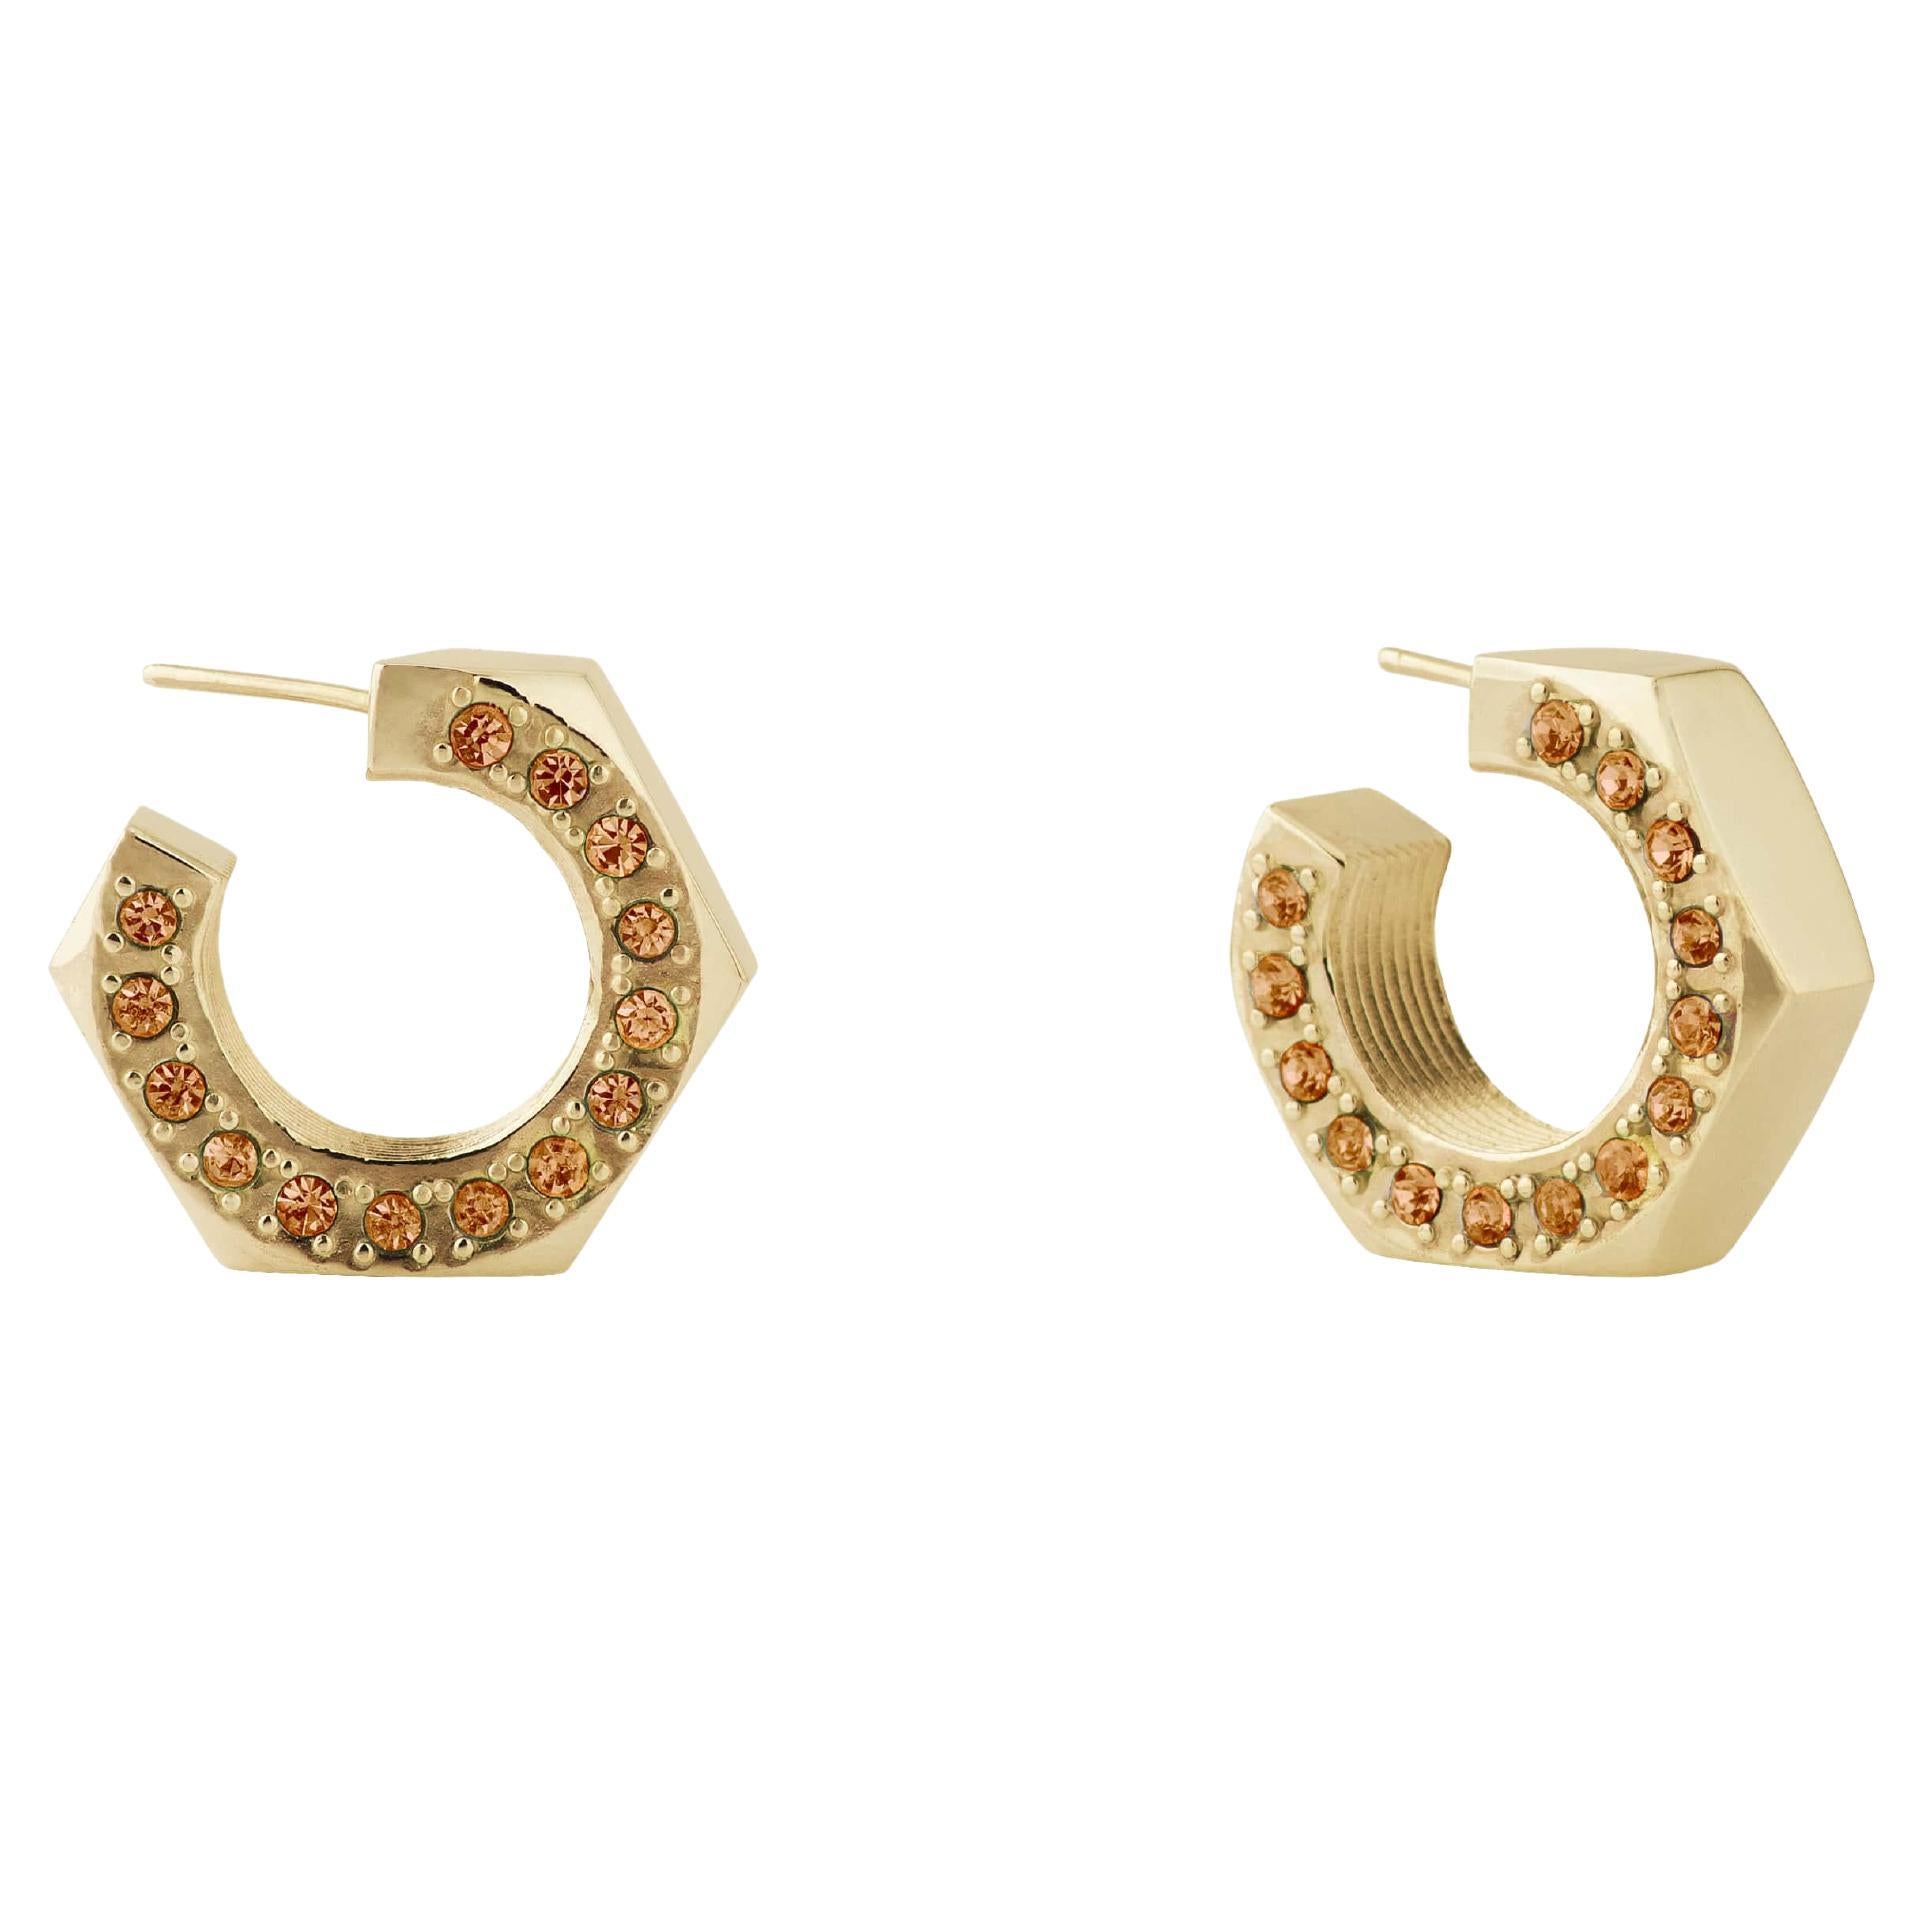 Big Gold Plated Silver Hoop Earrings with Natural Topaz Stones on the Side For Sale